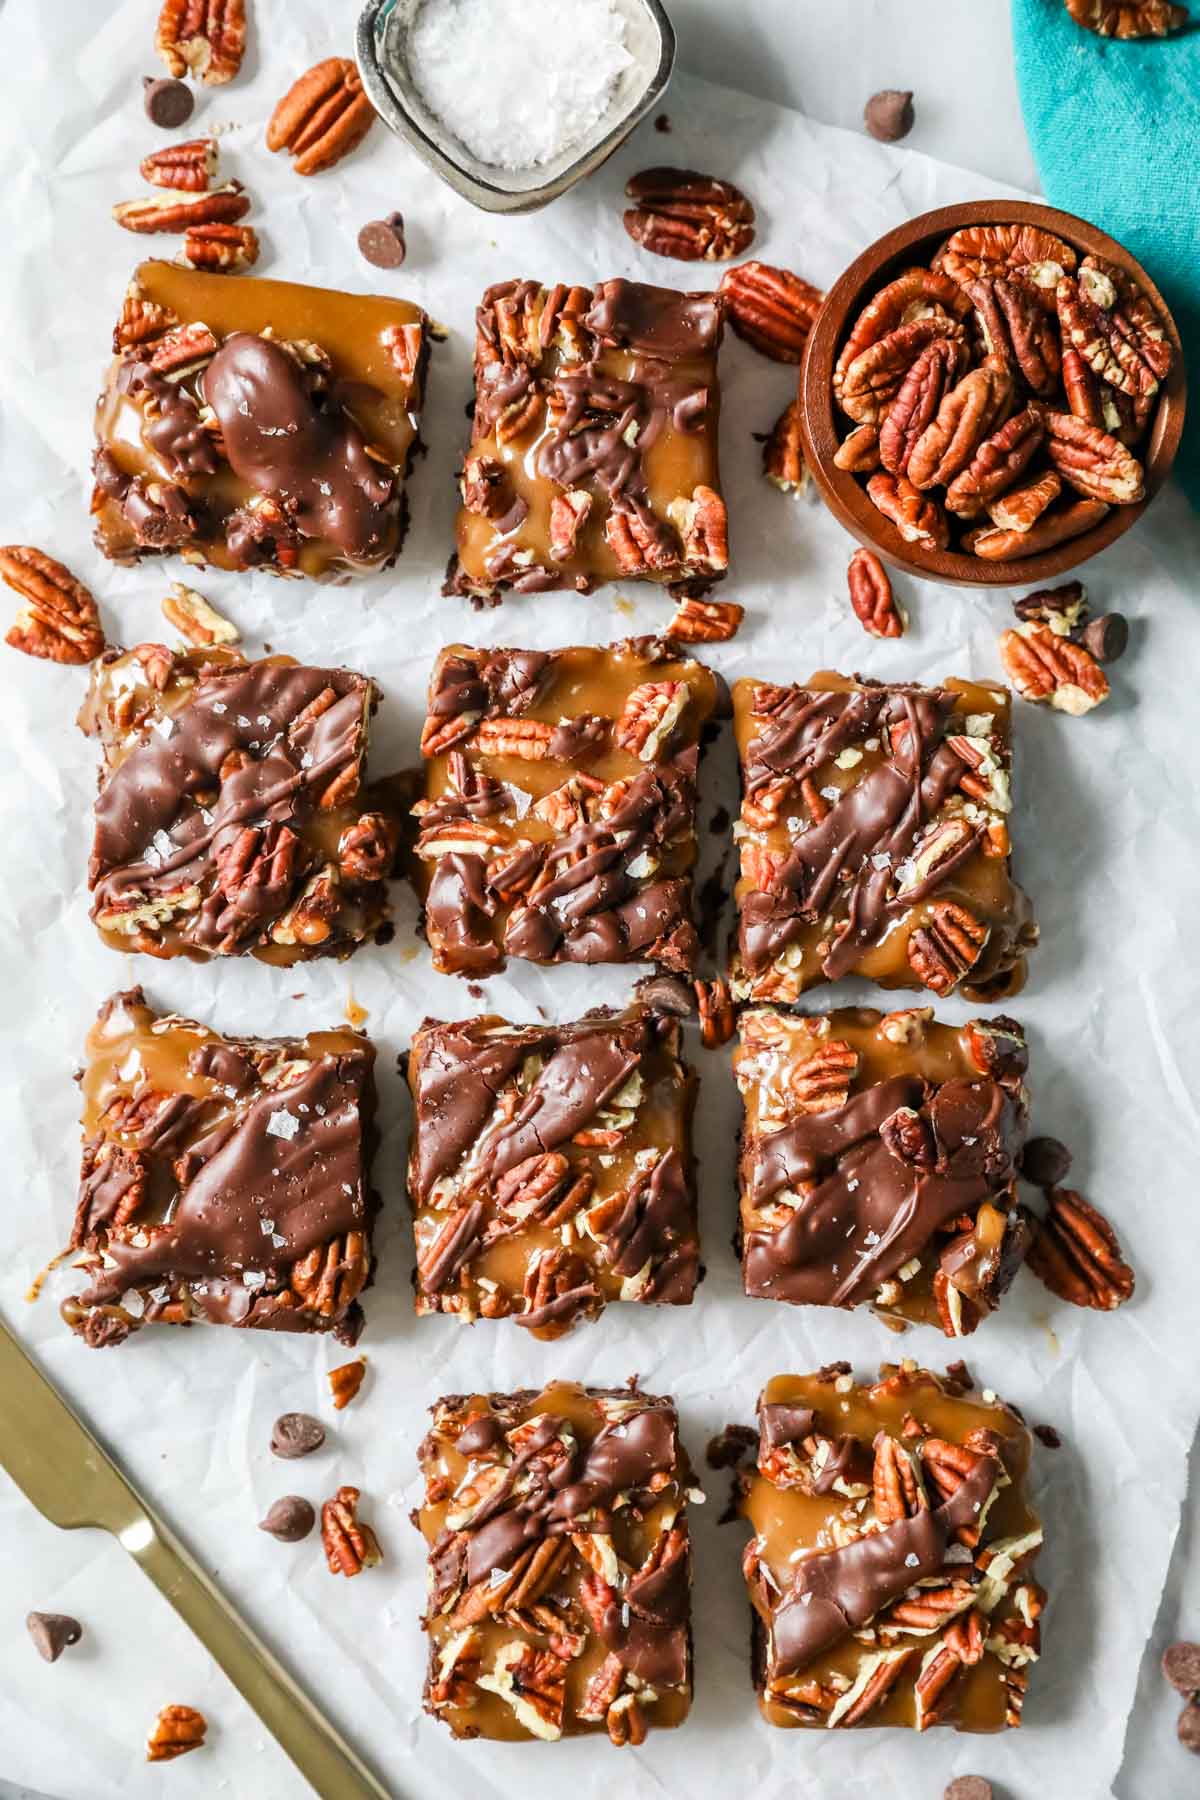 Overhead view of brownies topped with caramel and pecans.